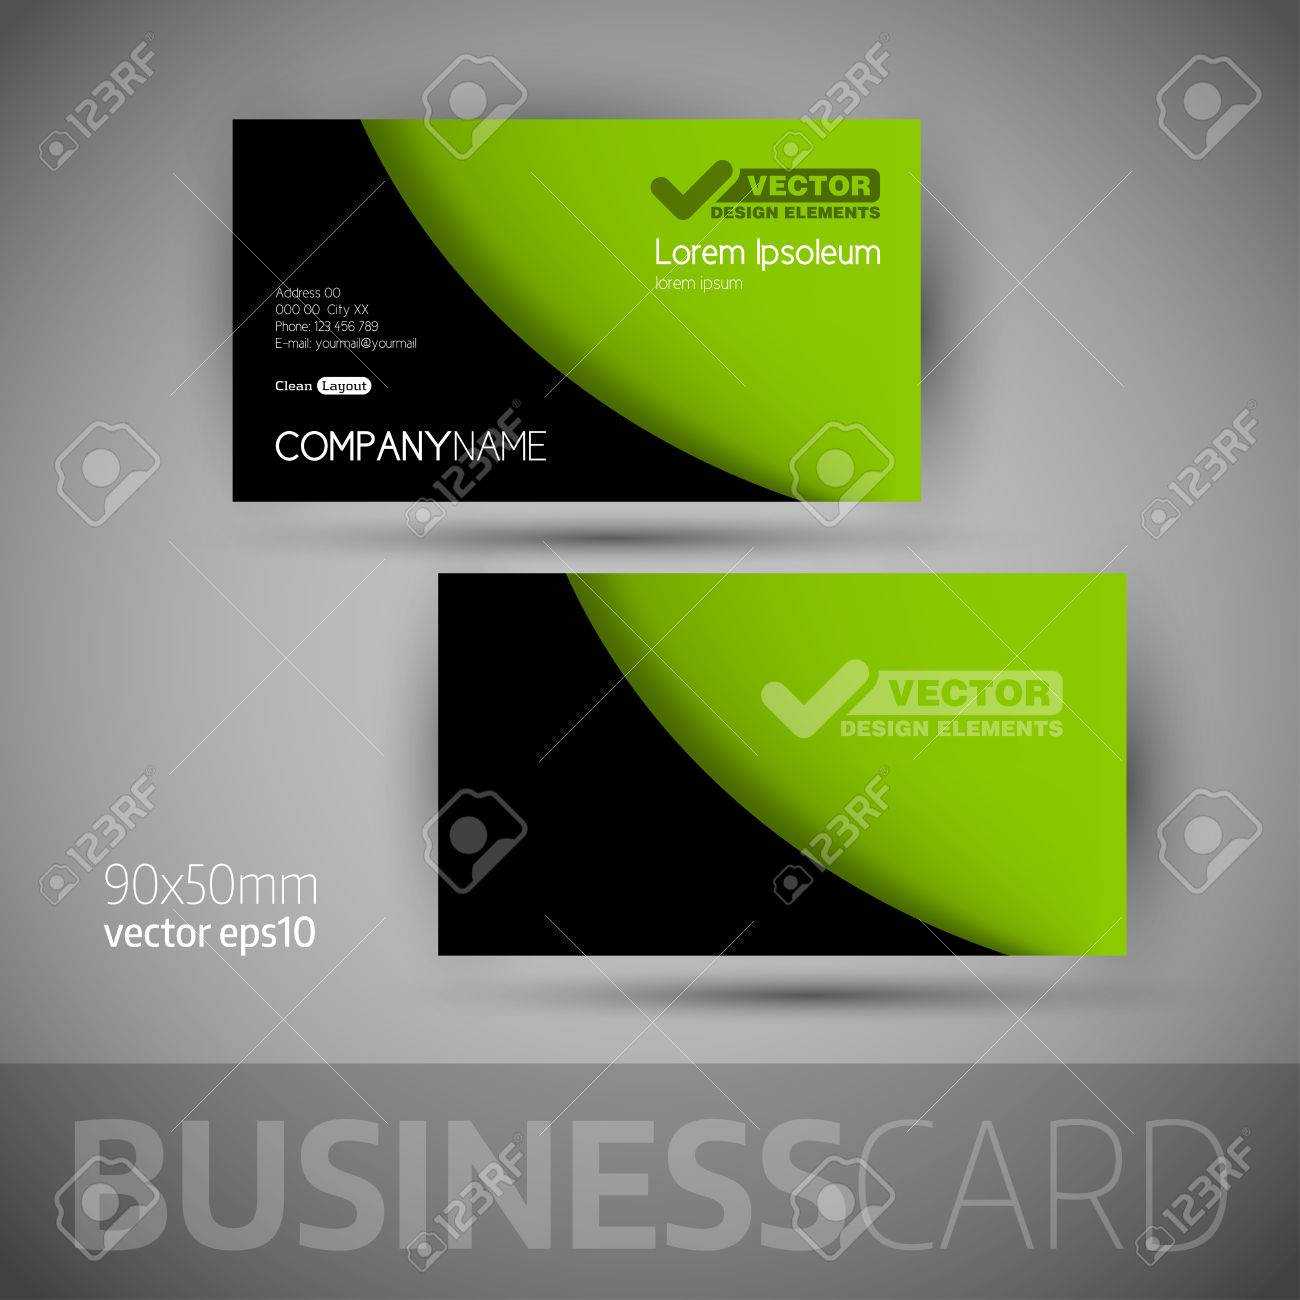 Business Card Template With Sample Texts. Elegant Vector Design.. Throughout Calling Card Free Template